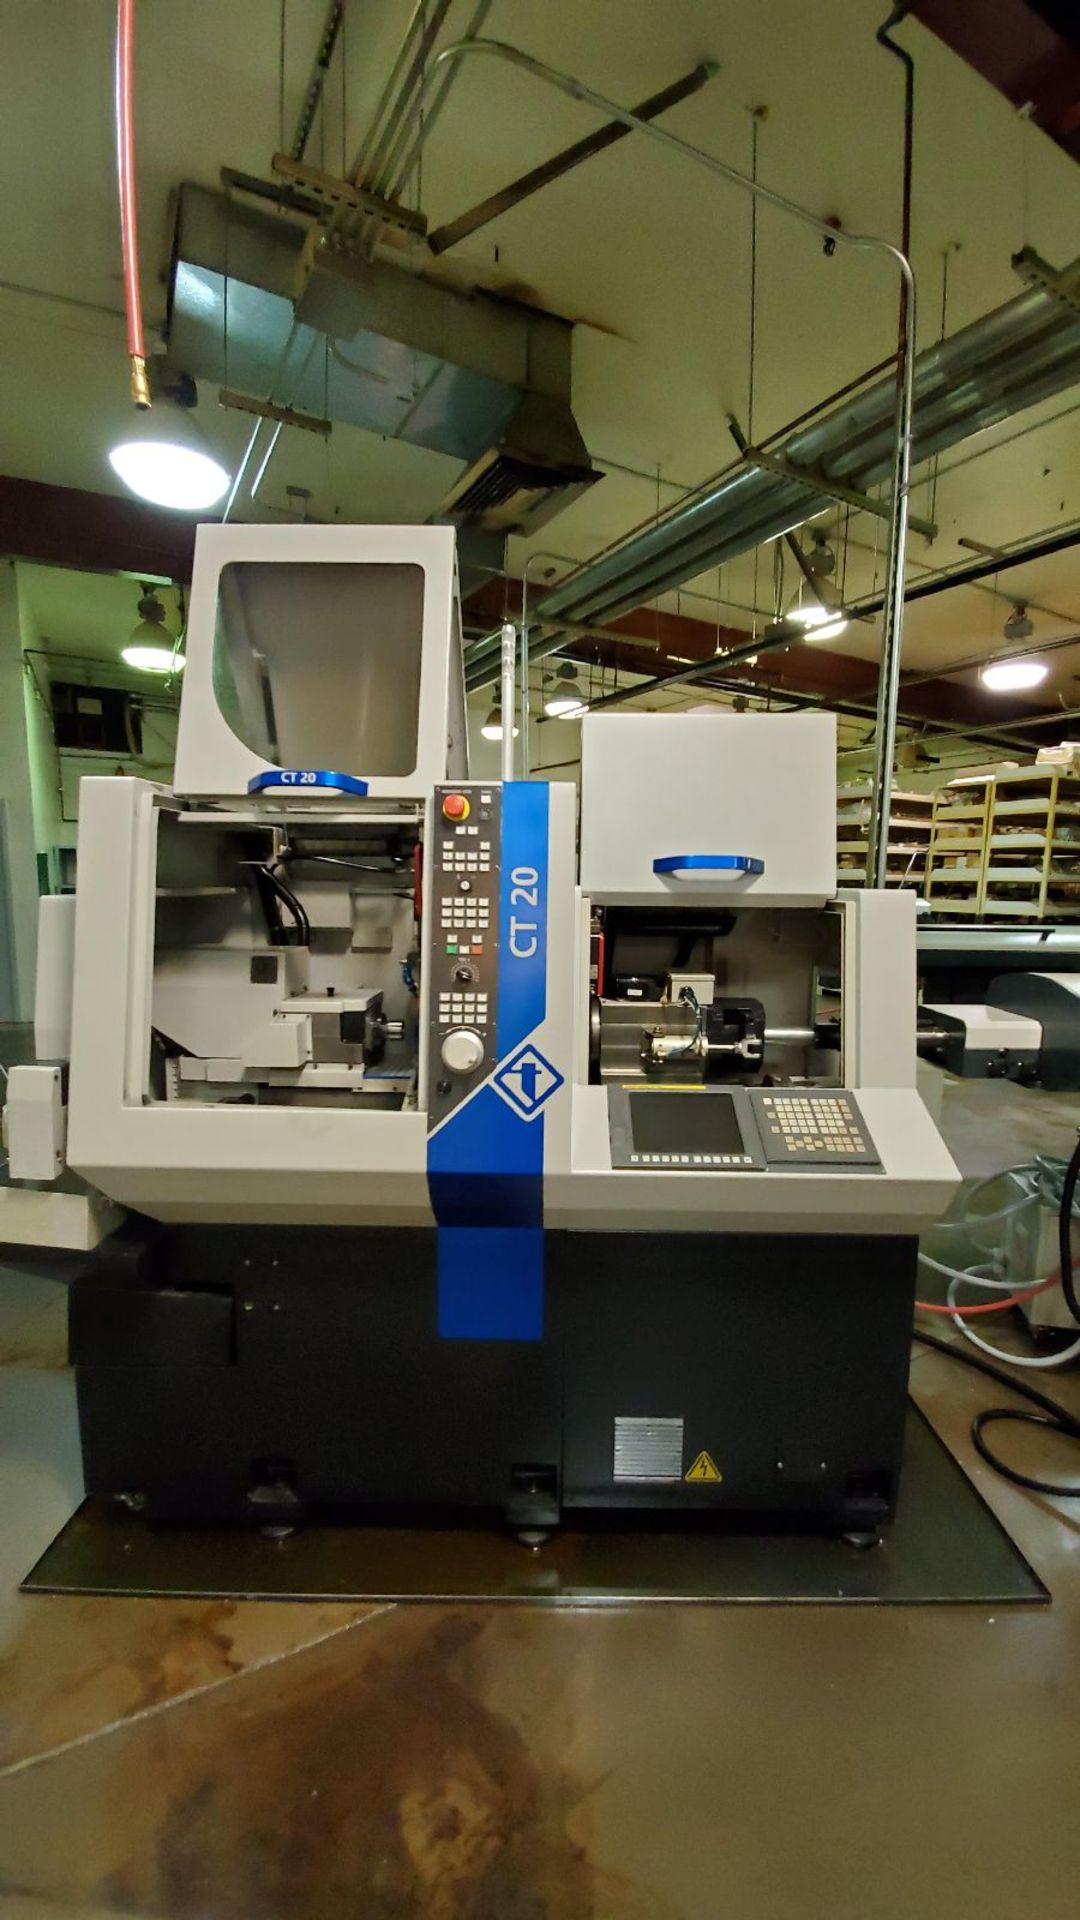 Tornos Model CT 20 7-Axis CNC Swiss-Type Lathe - Image 5 of 25